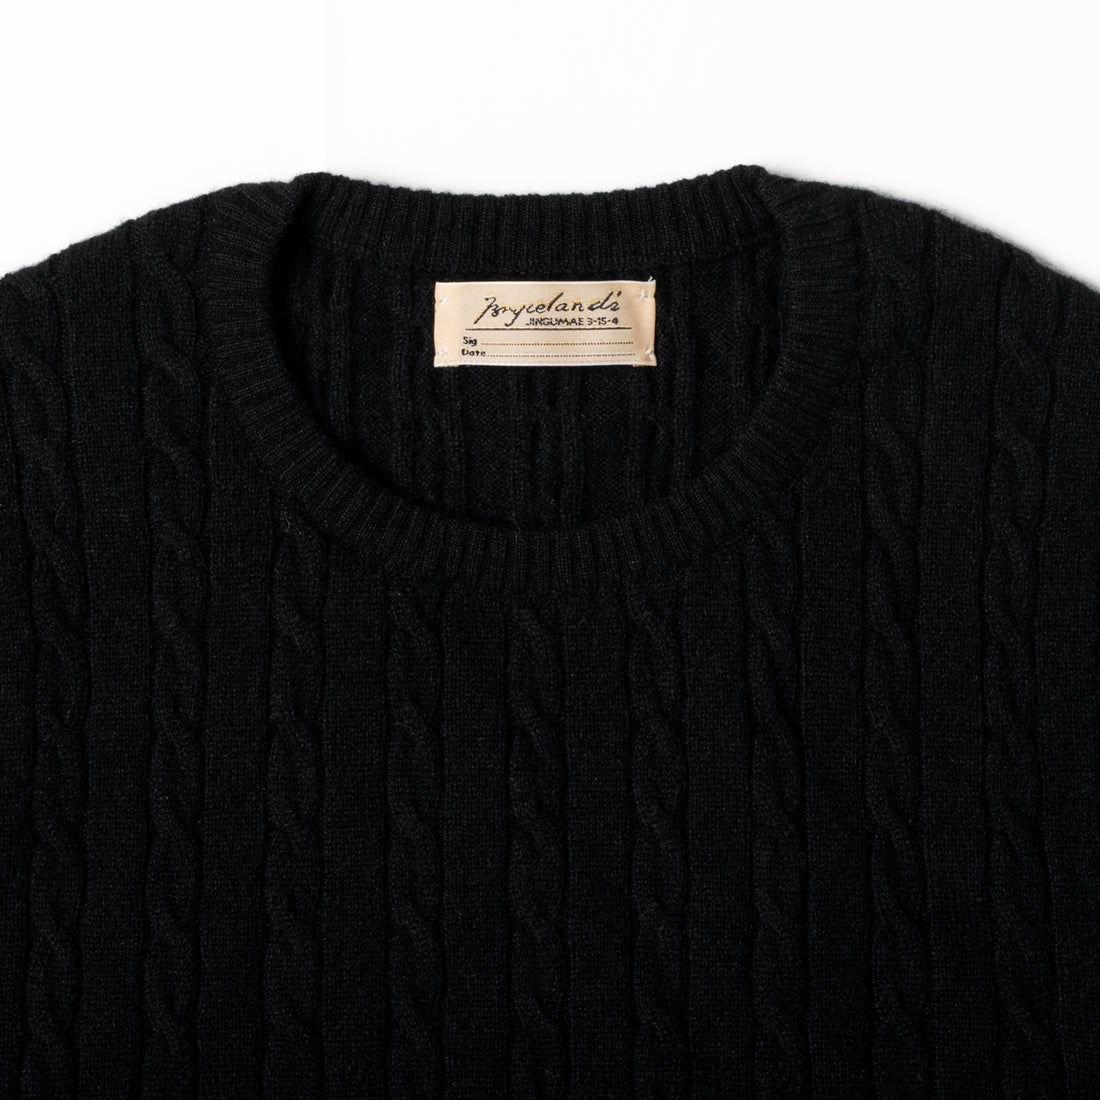 Bryceland's Cable-Knit Crewneck Pullover Black